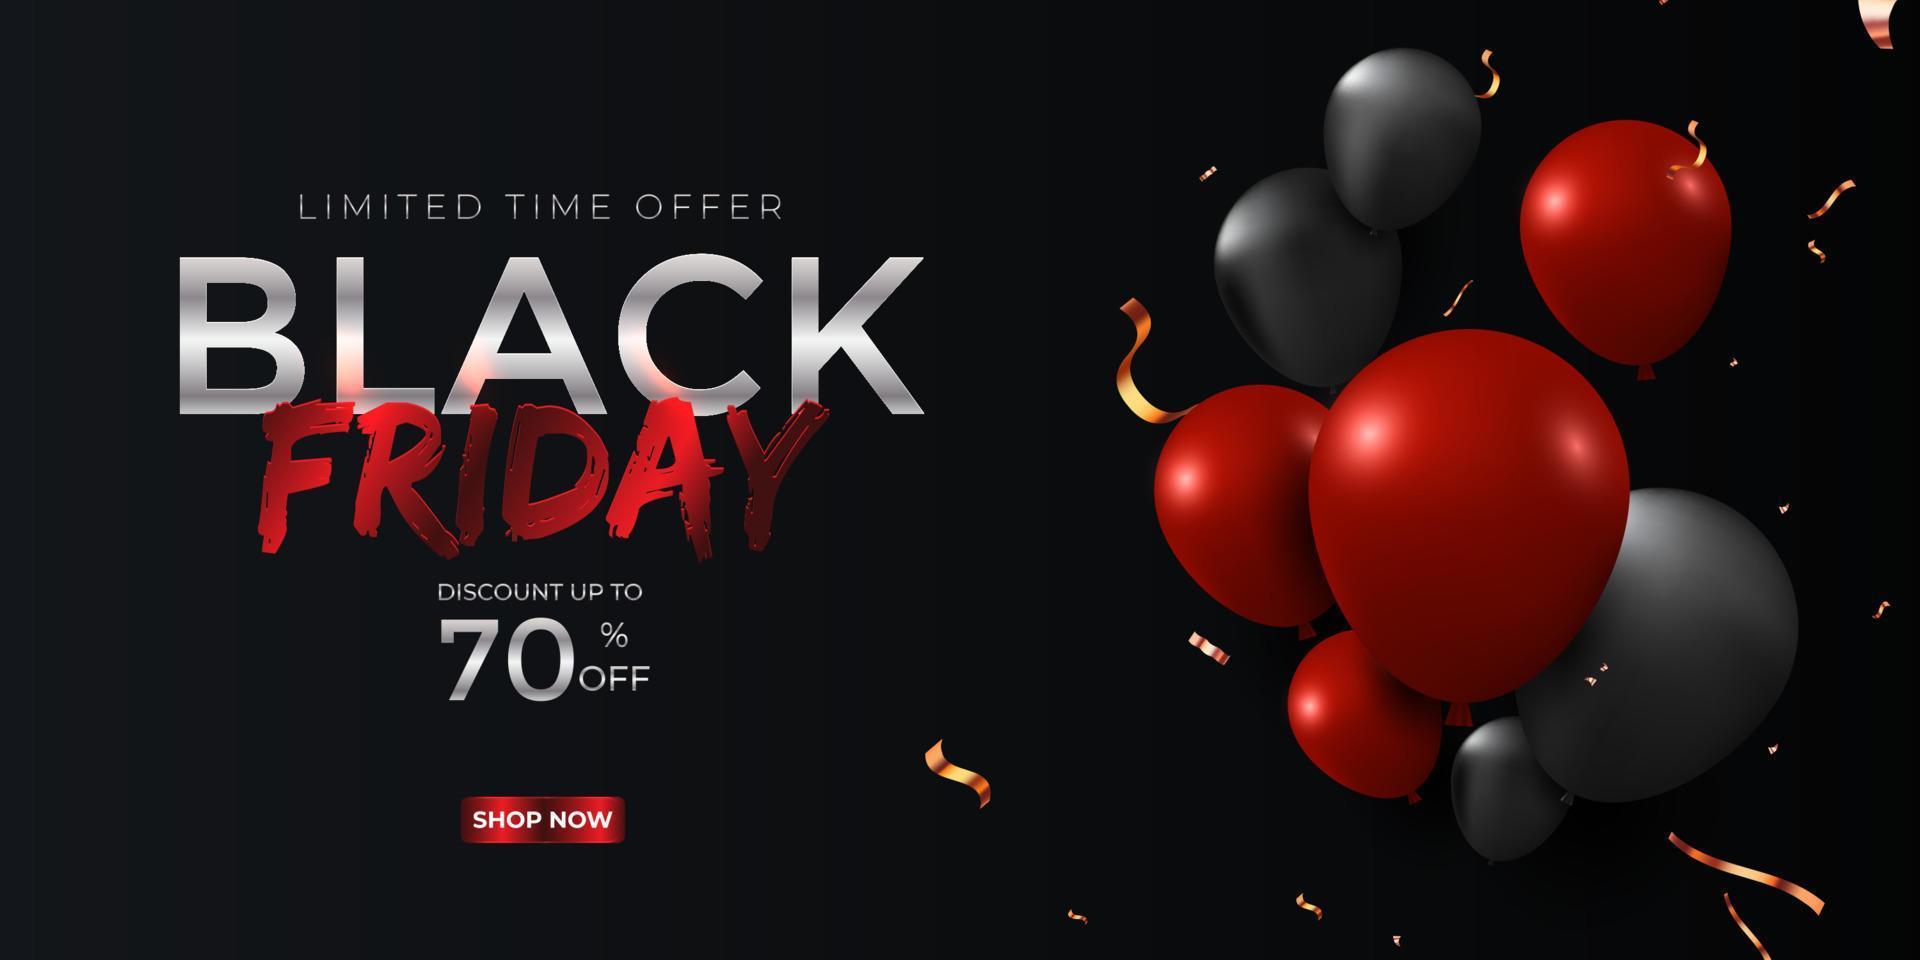 Black Friday sale advertising banner design with 3d stylized red color letters and glossy balloons vector